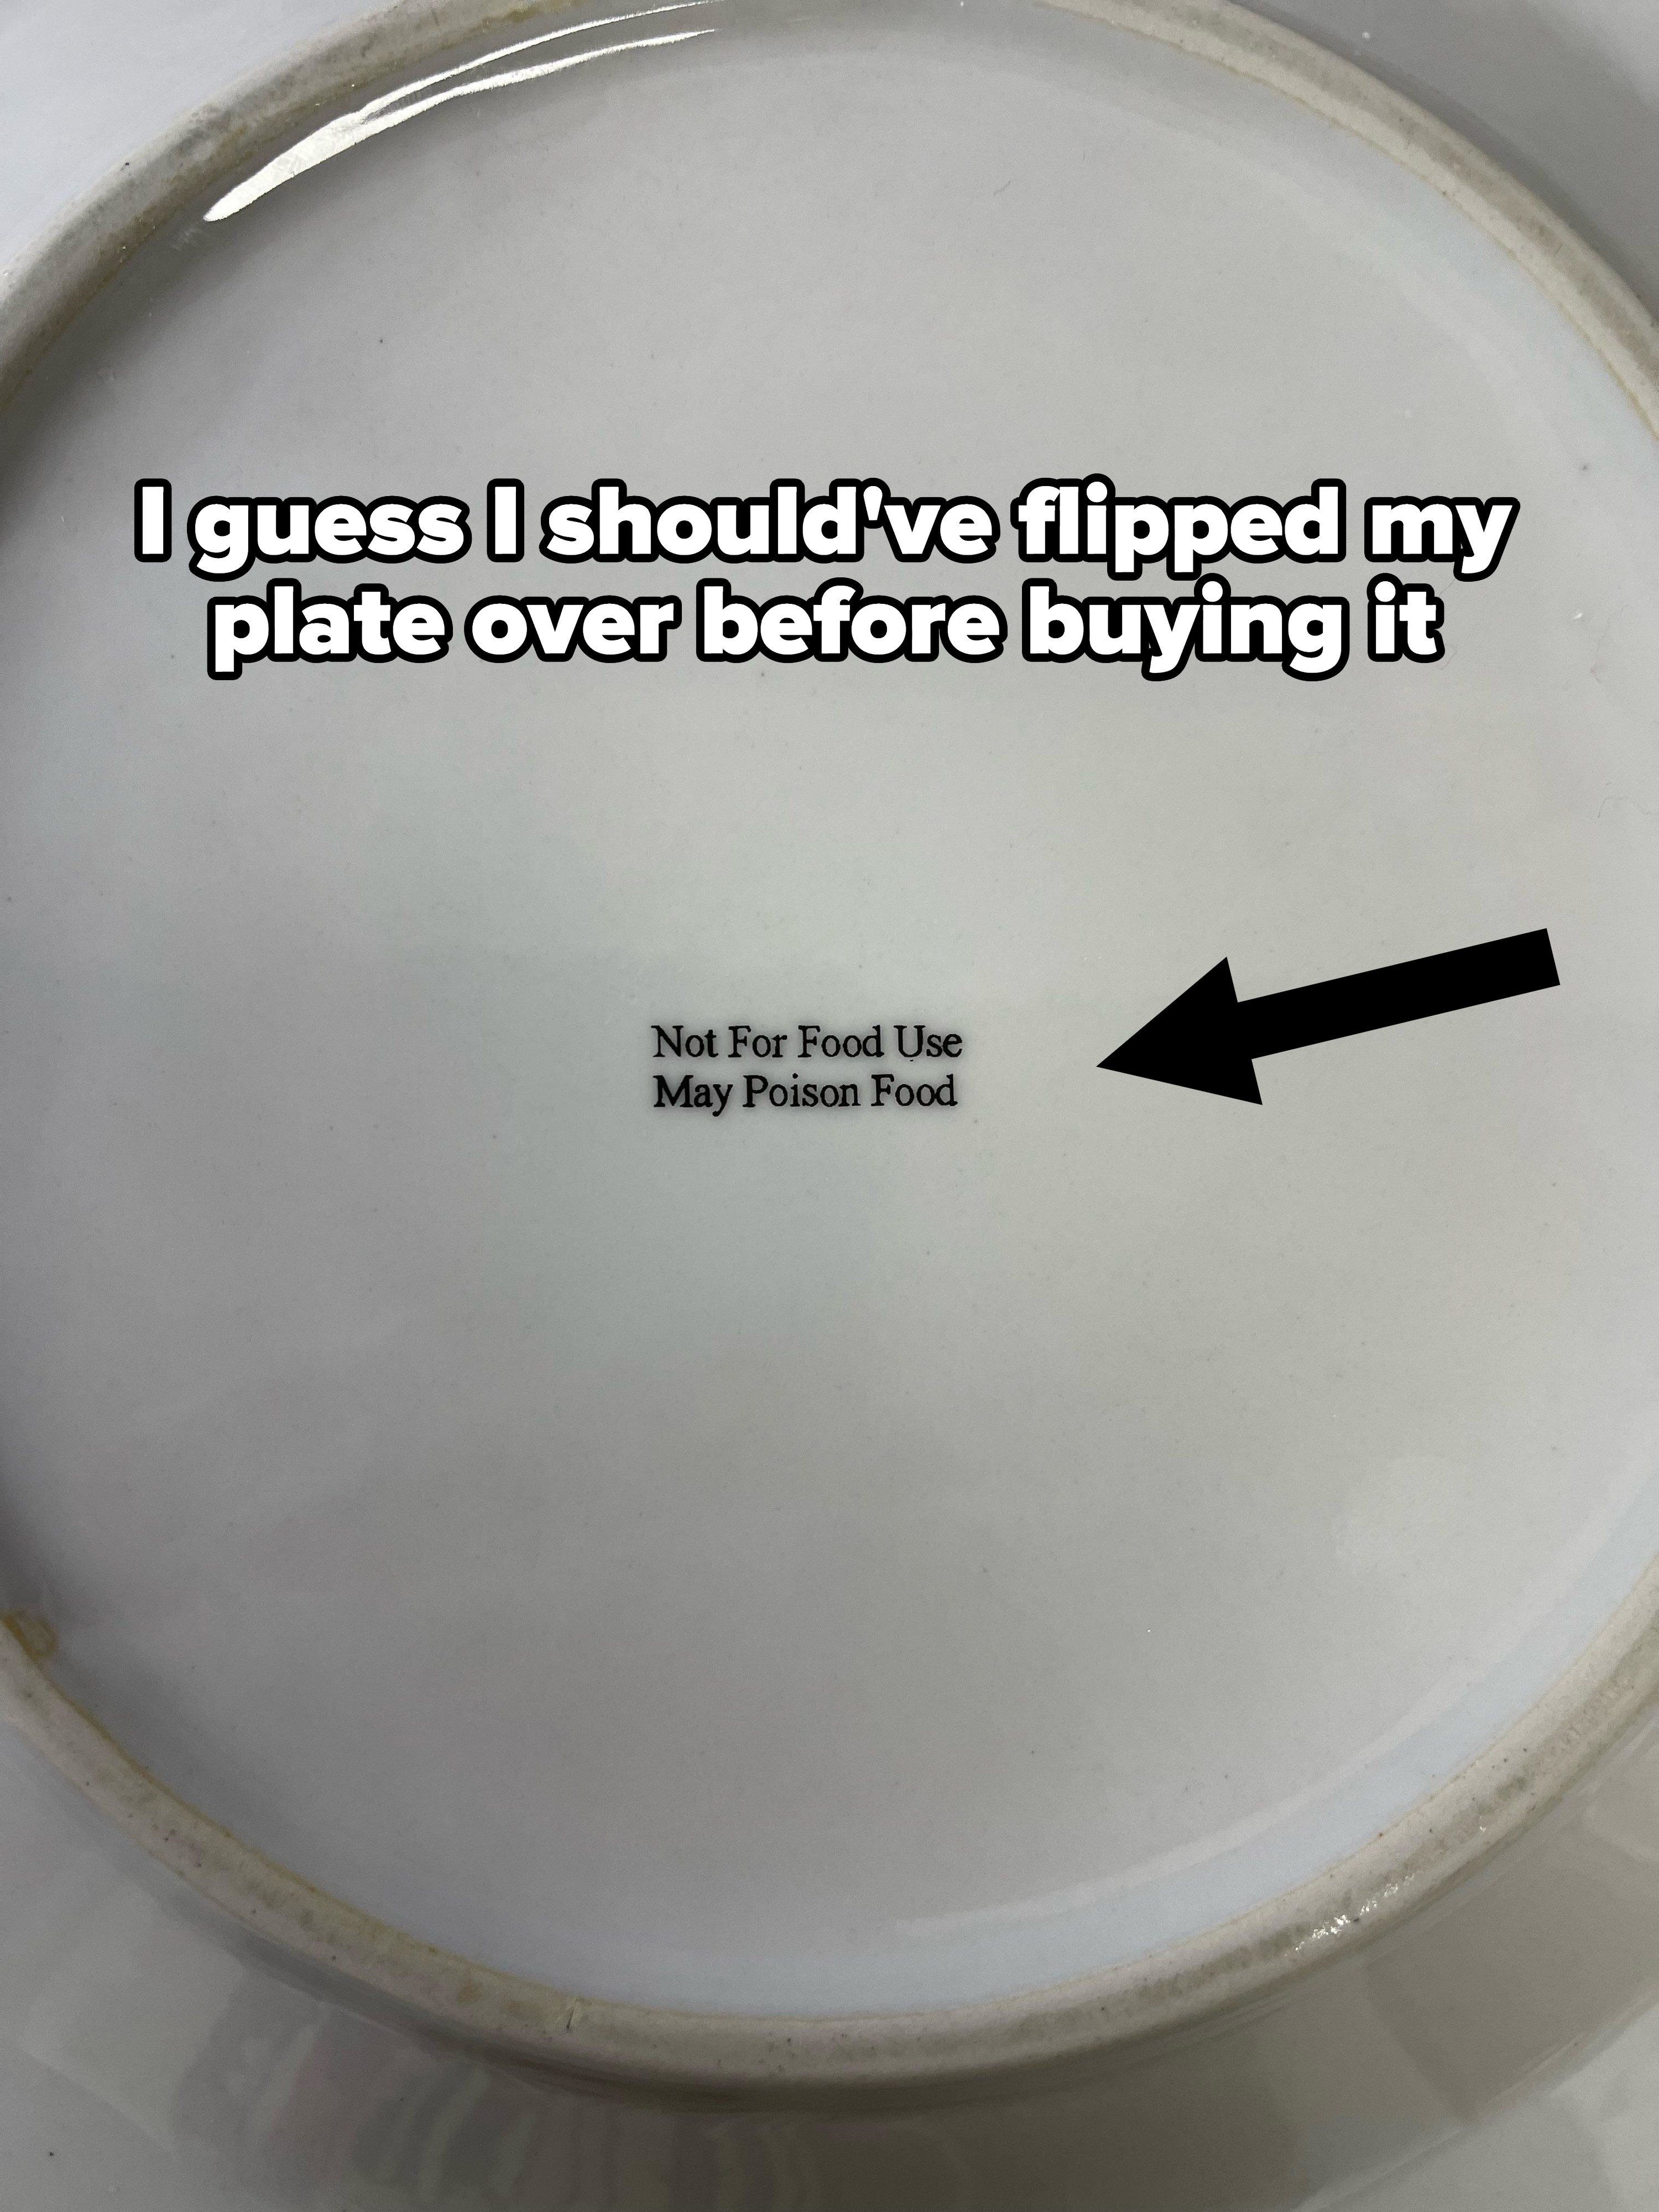 A plate that says &quot;may poison food&quot;